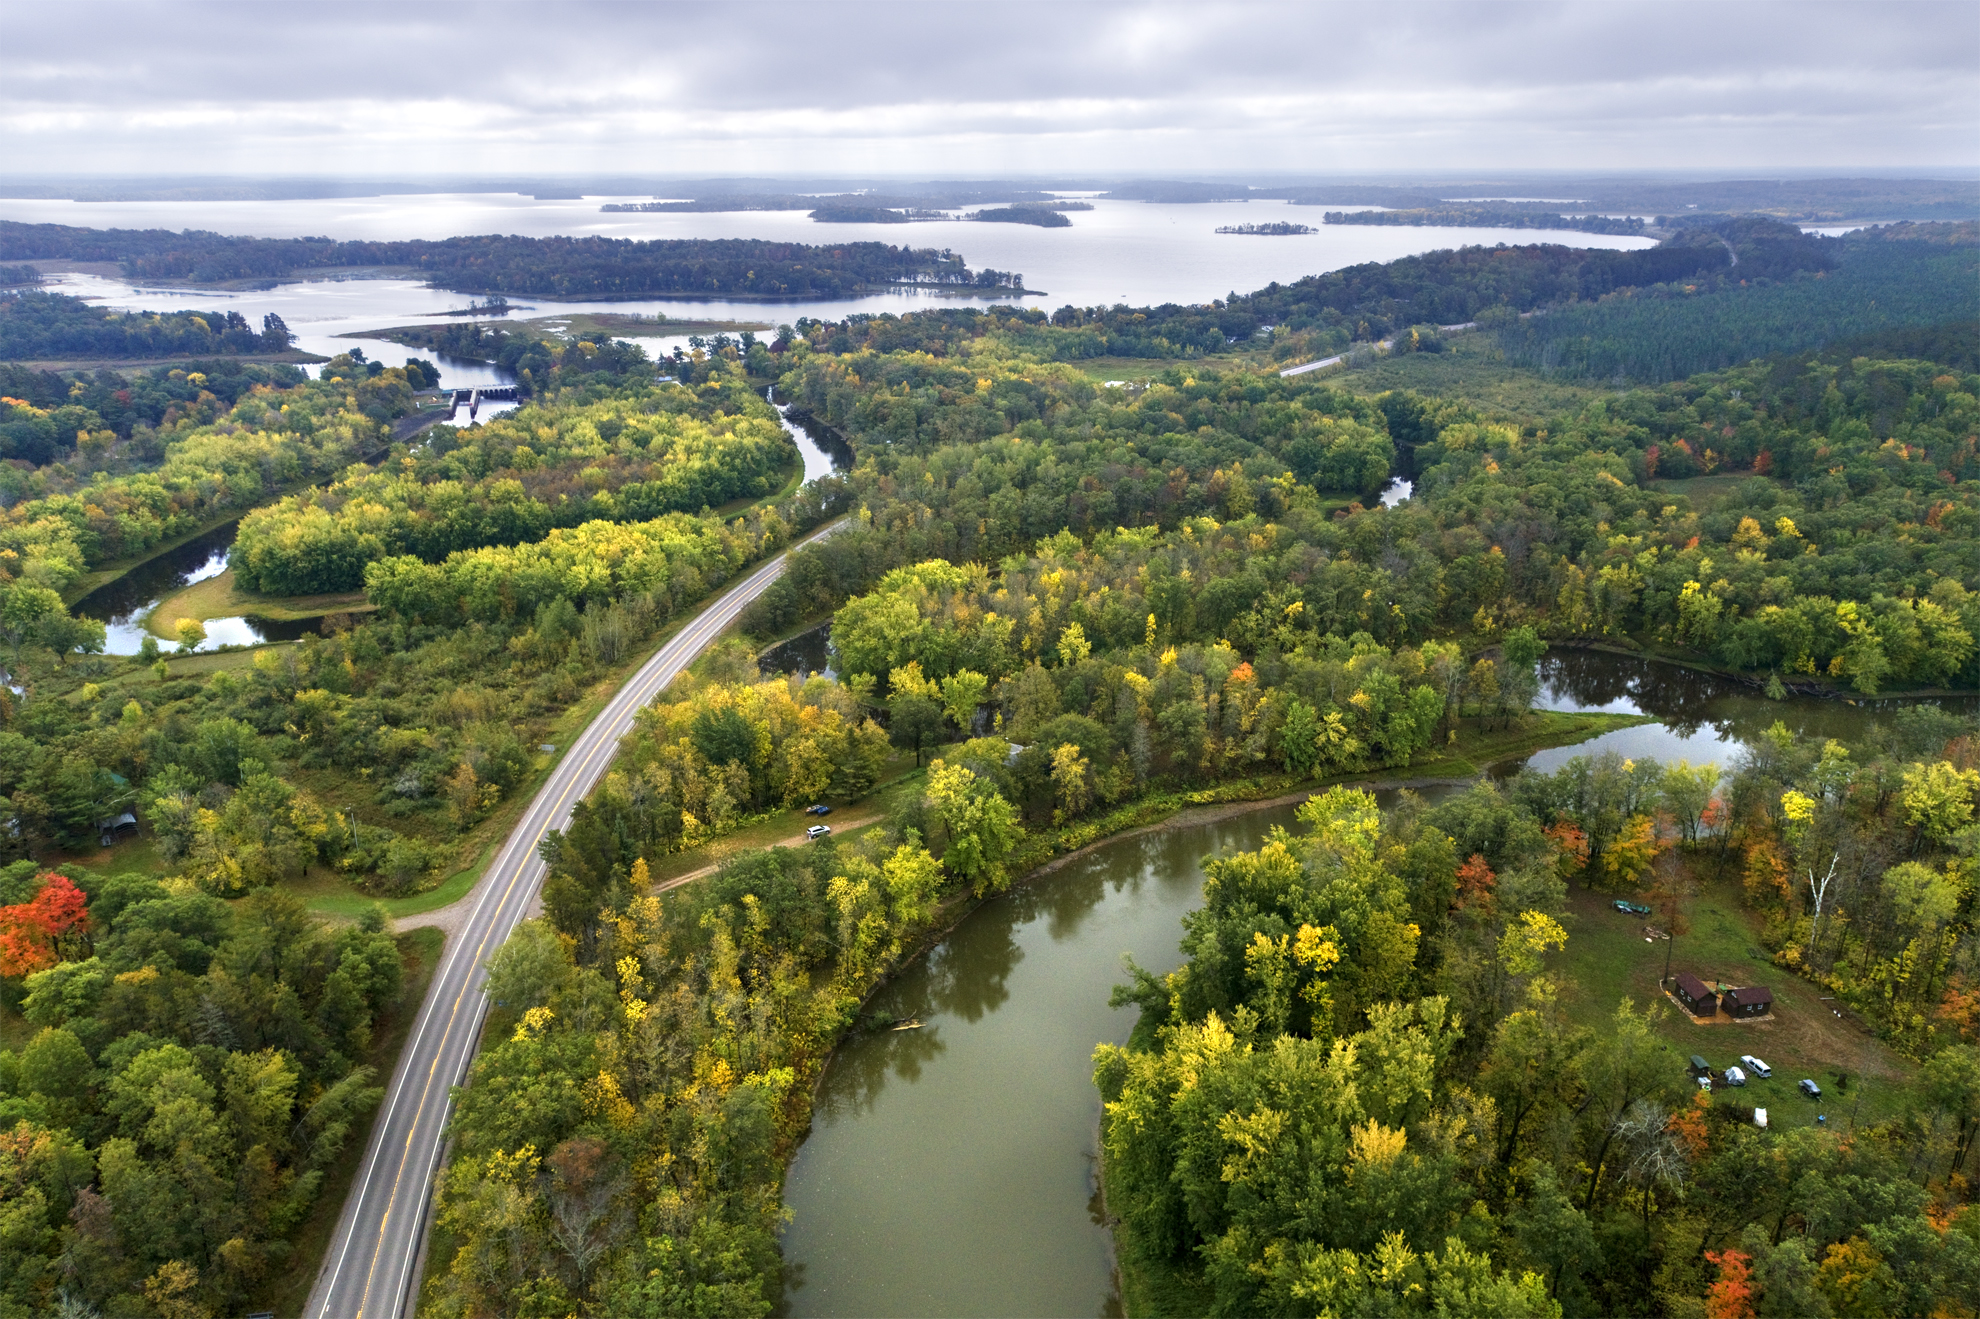 Confluence of the Mississippi River and Big Sandy Lake in northern Minnesota